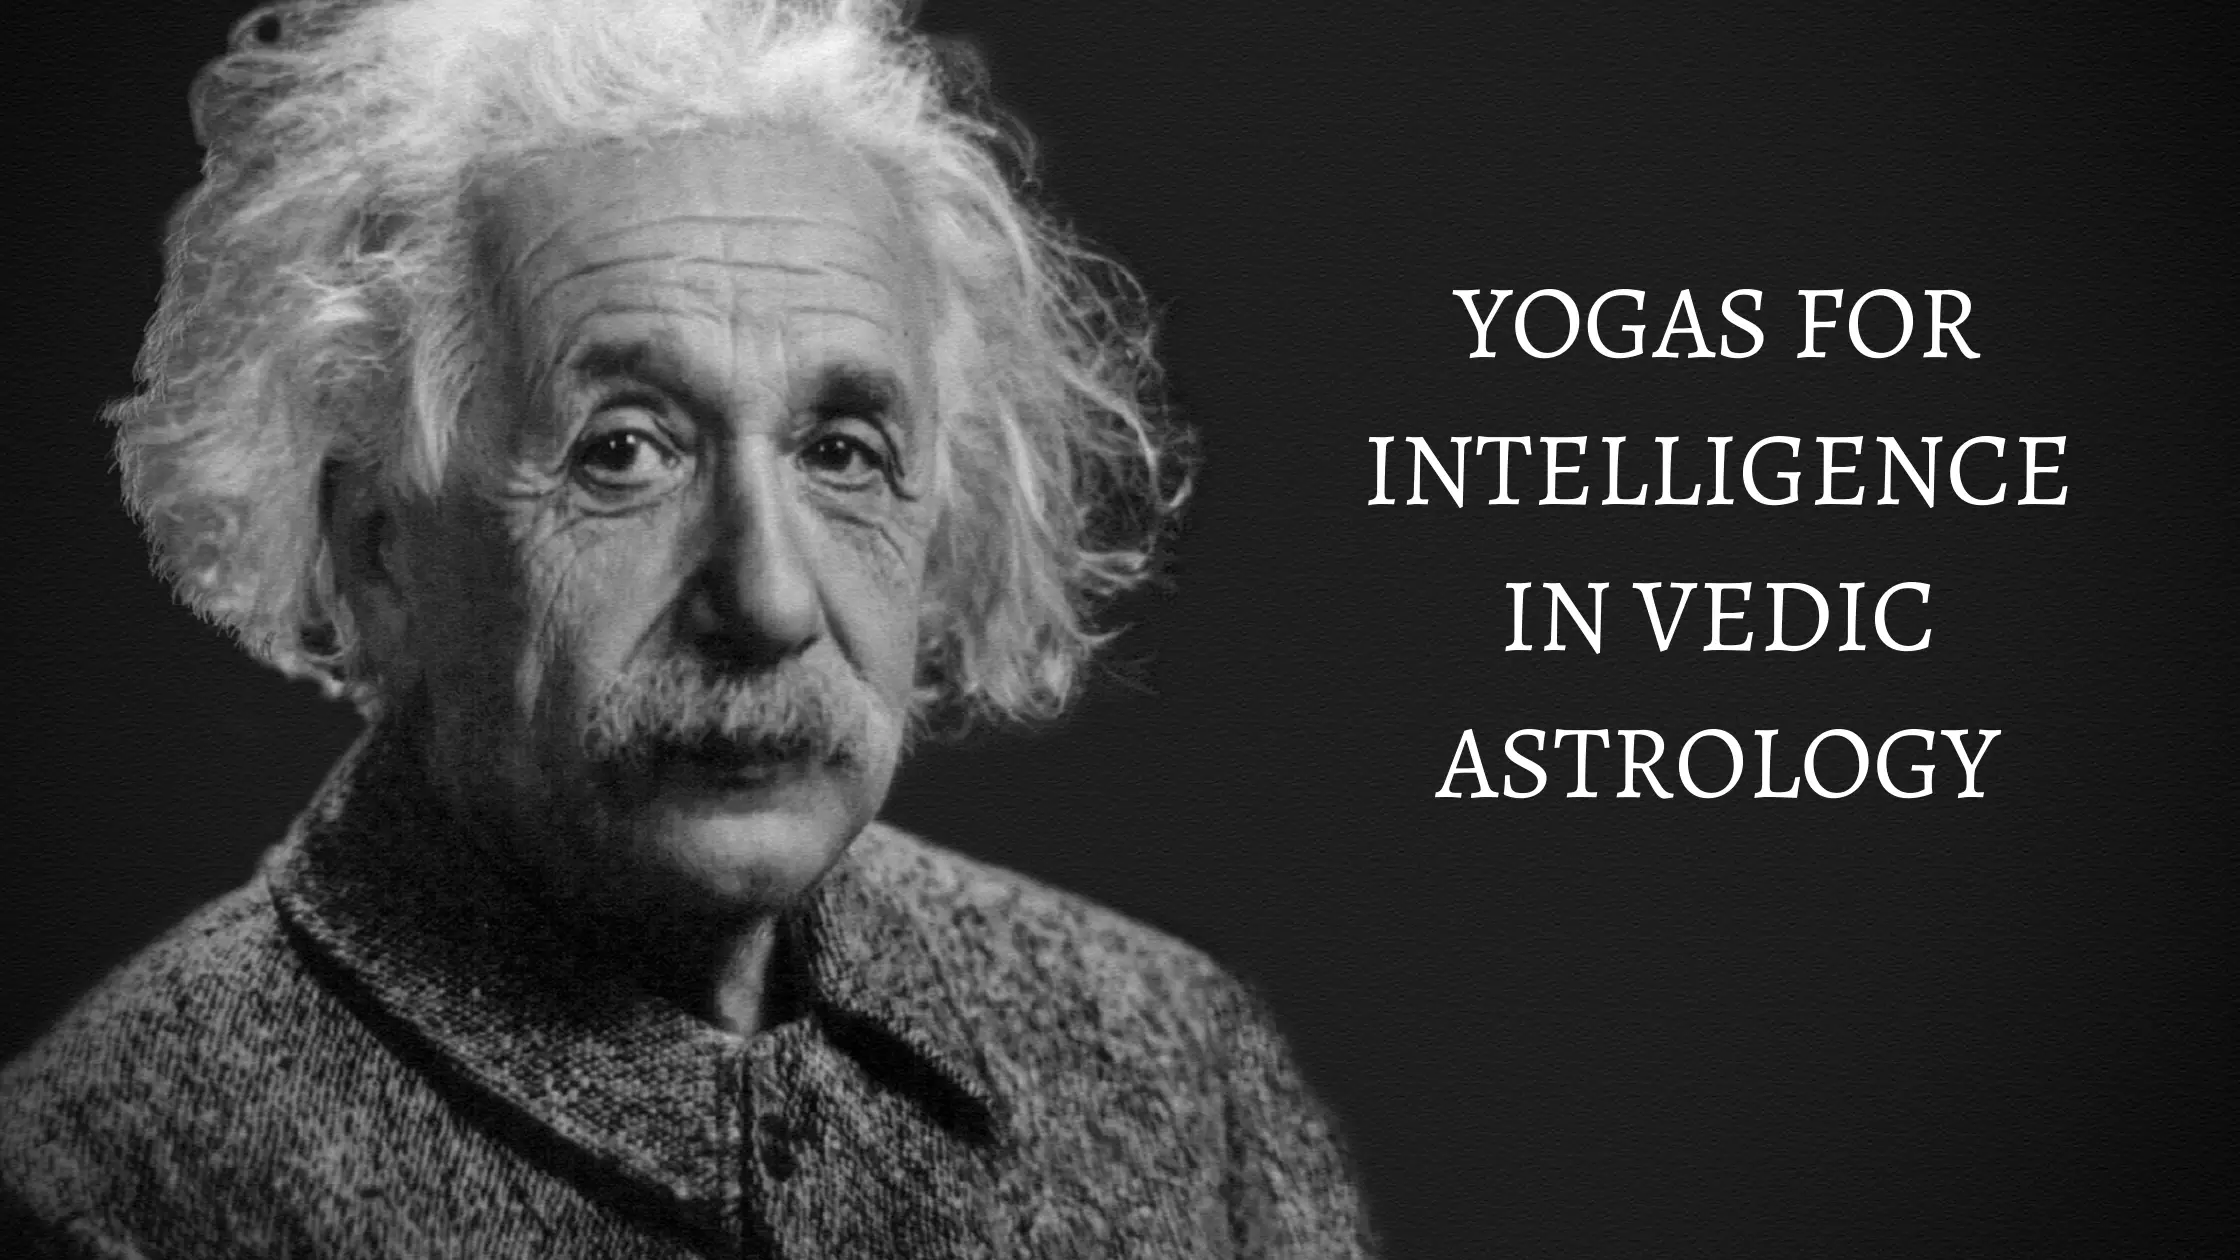 YOGAS FOR INTELLIGENCE IN VEDIC ASTROLOGY